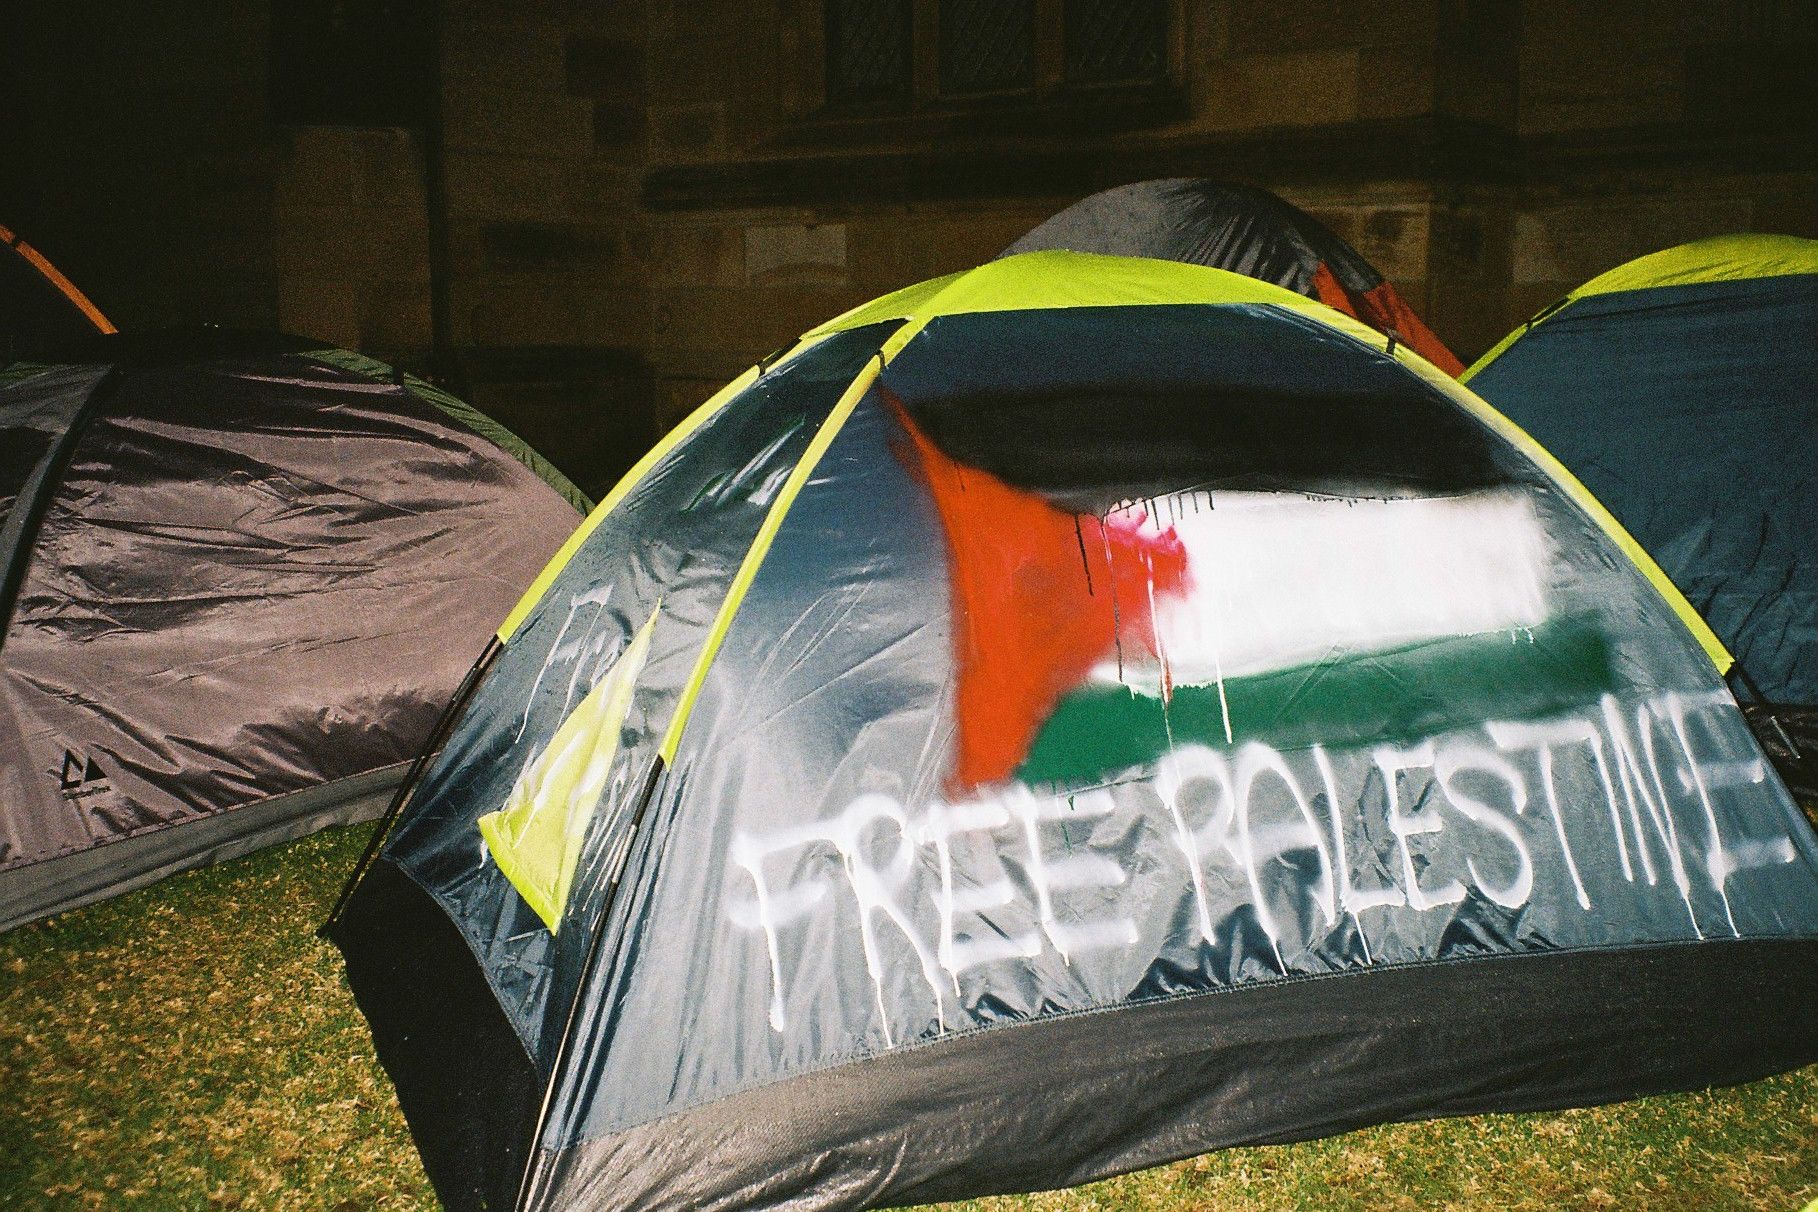 A tent with the words "FREE PALESTINE" and the Palestinian flag graffitied all over it